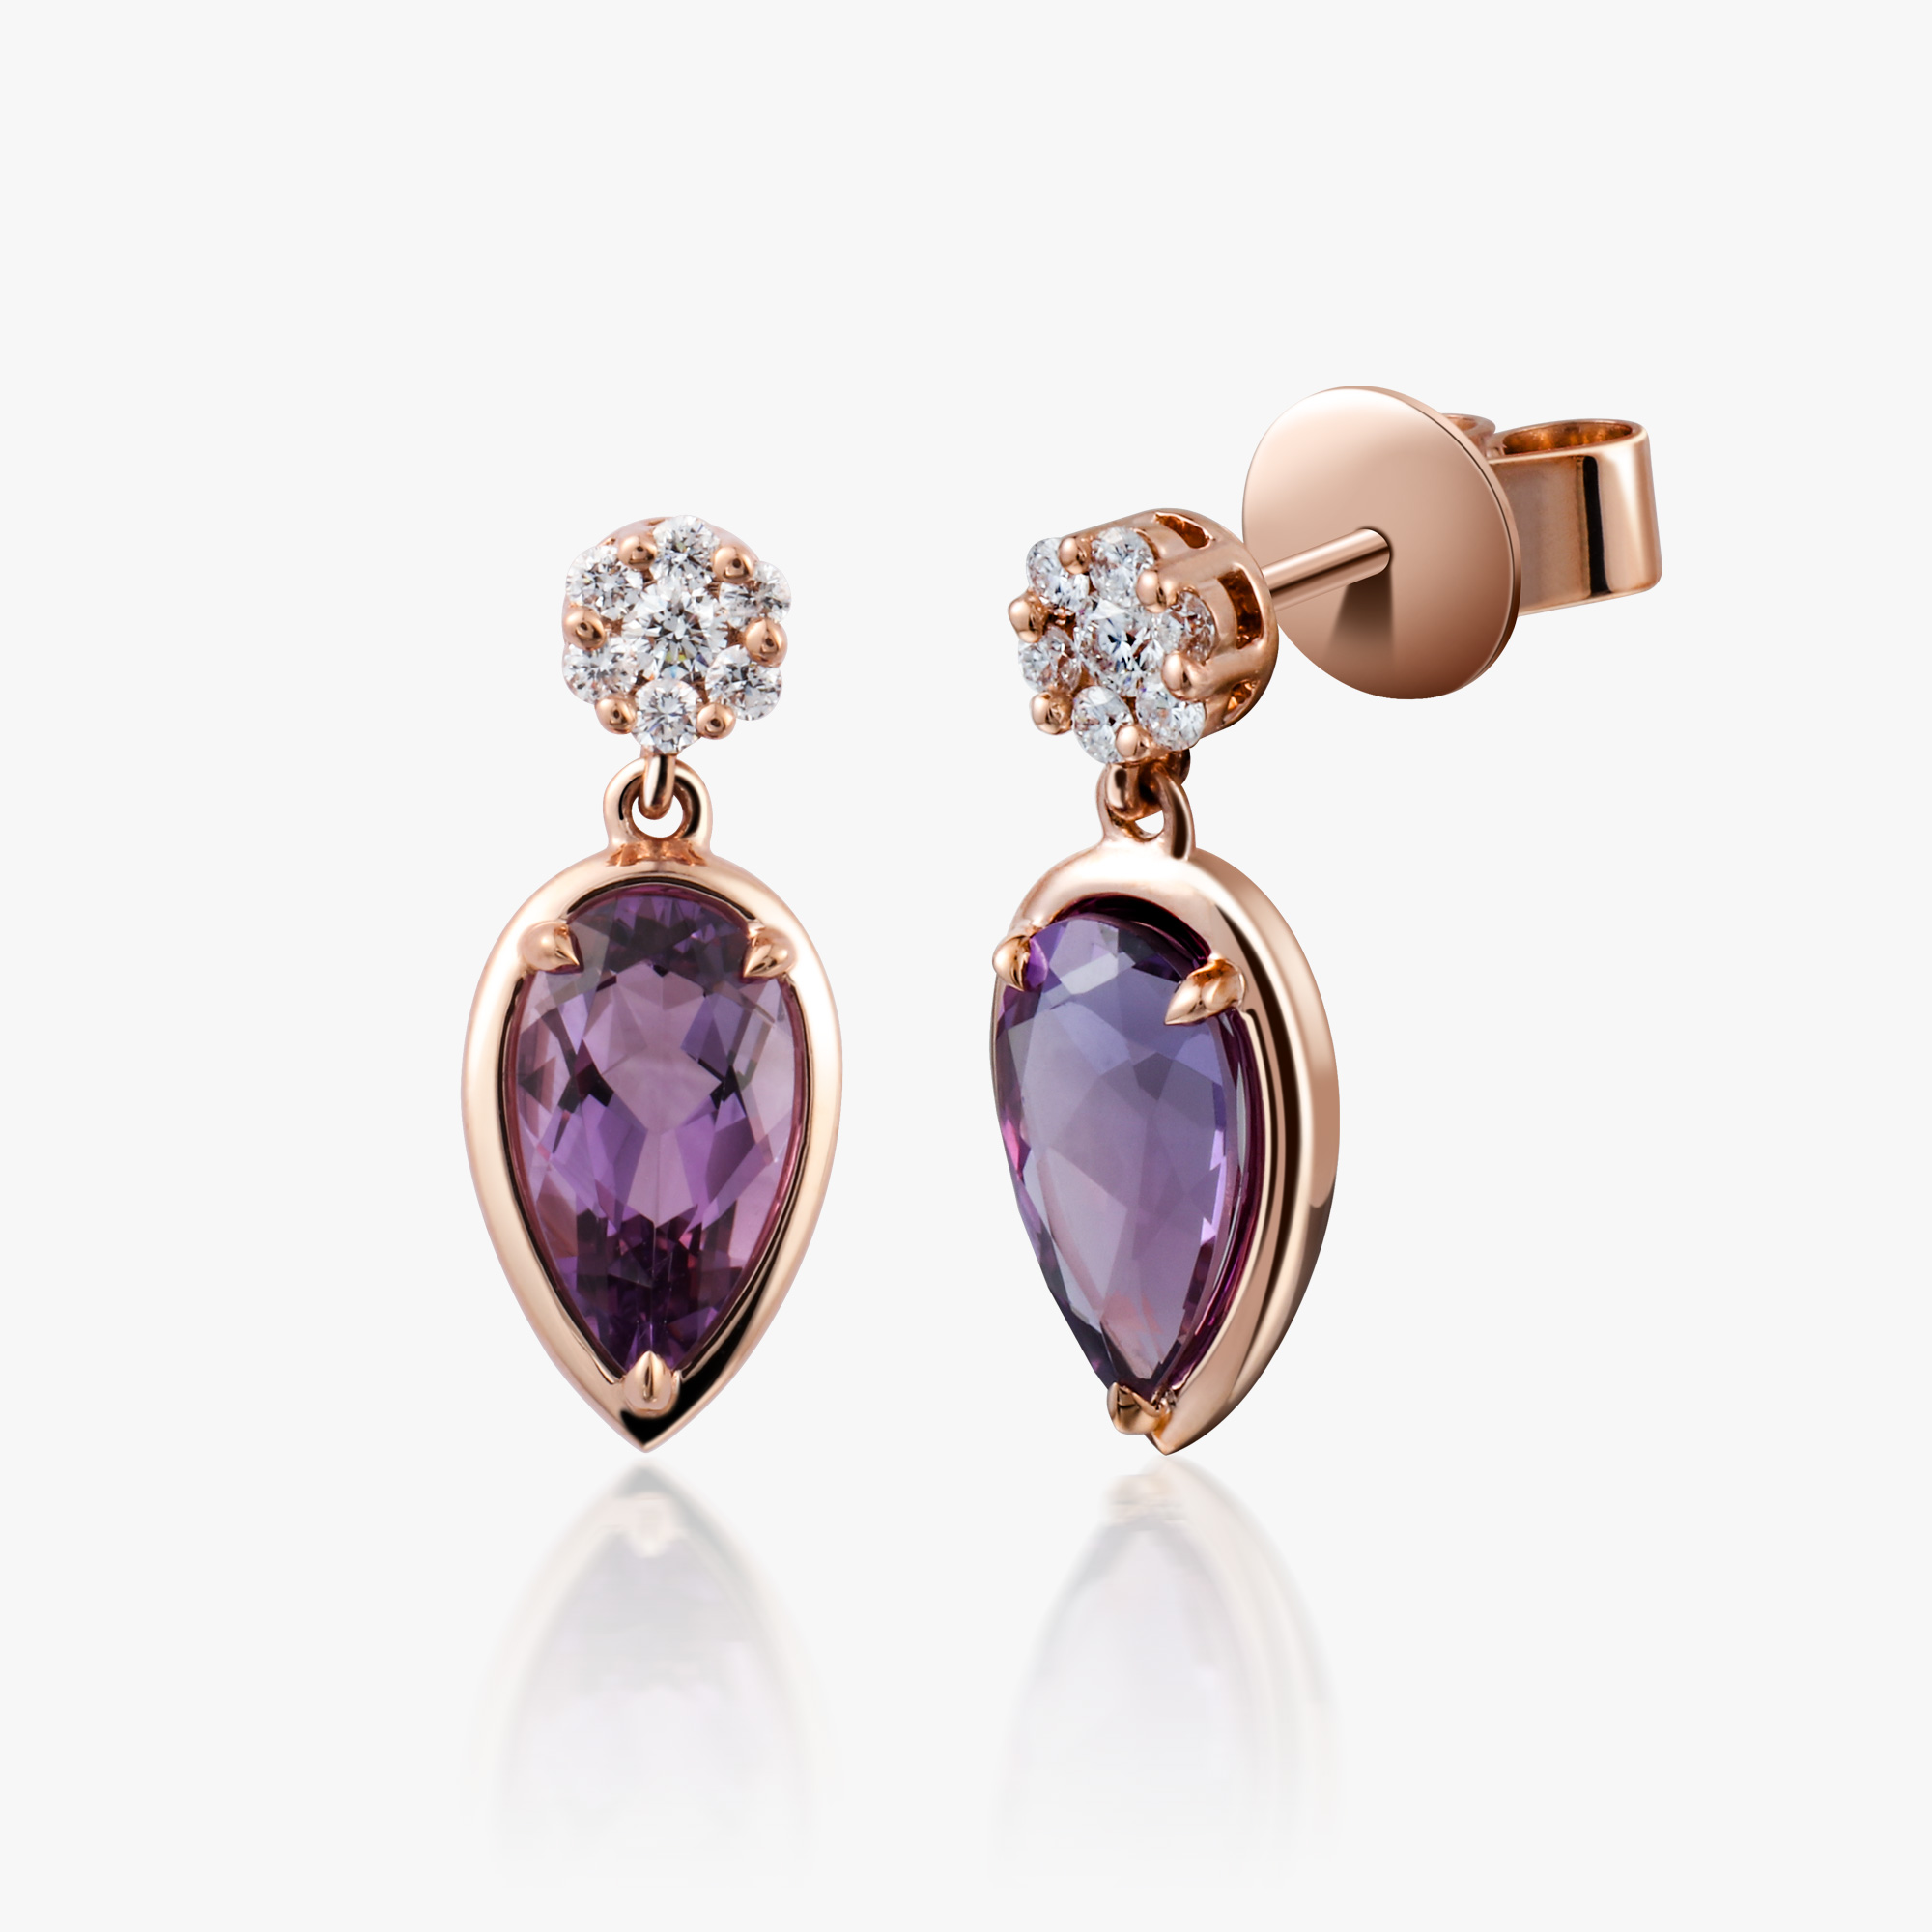 ACCA 14KR Earrings with Amethyst and Diamond